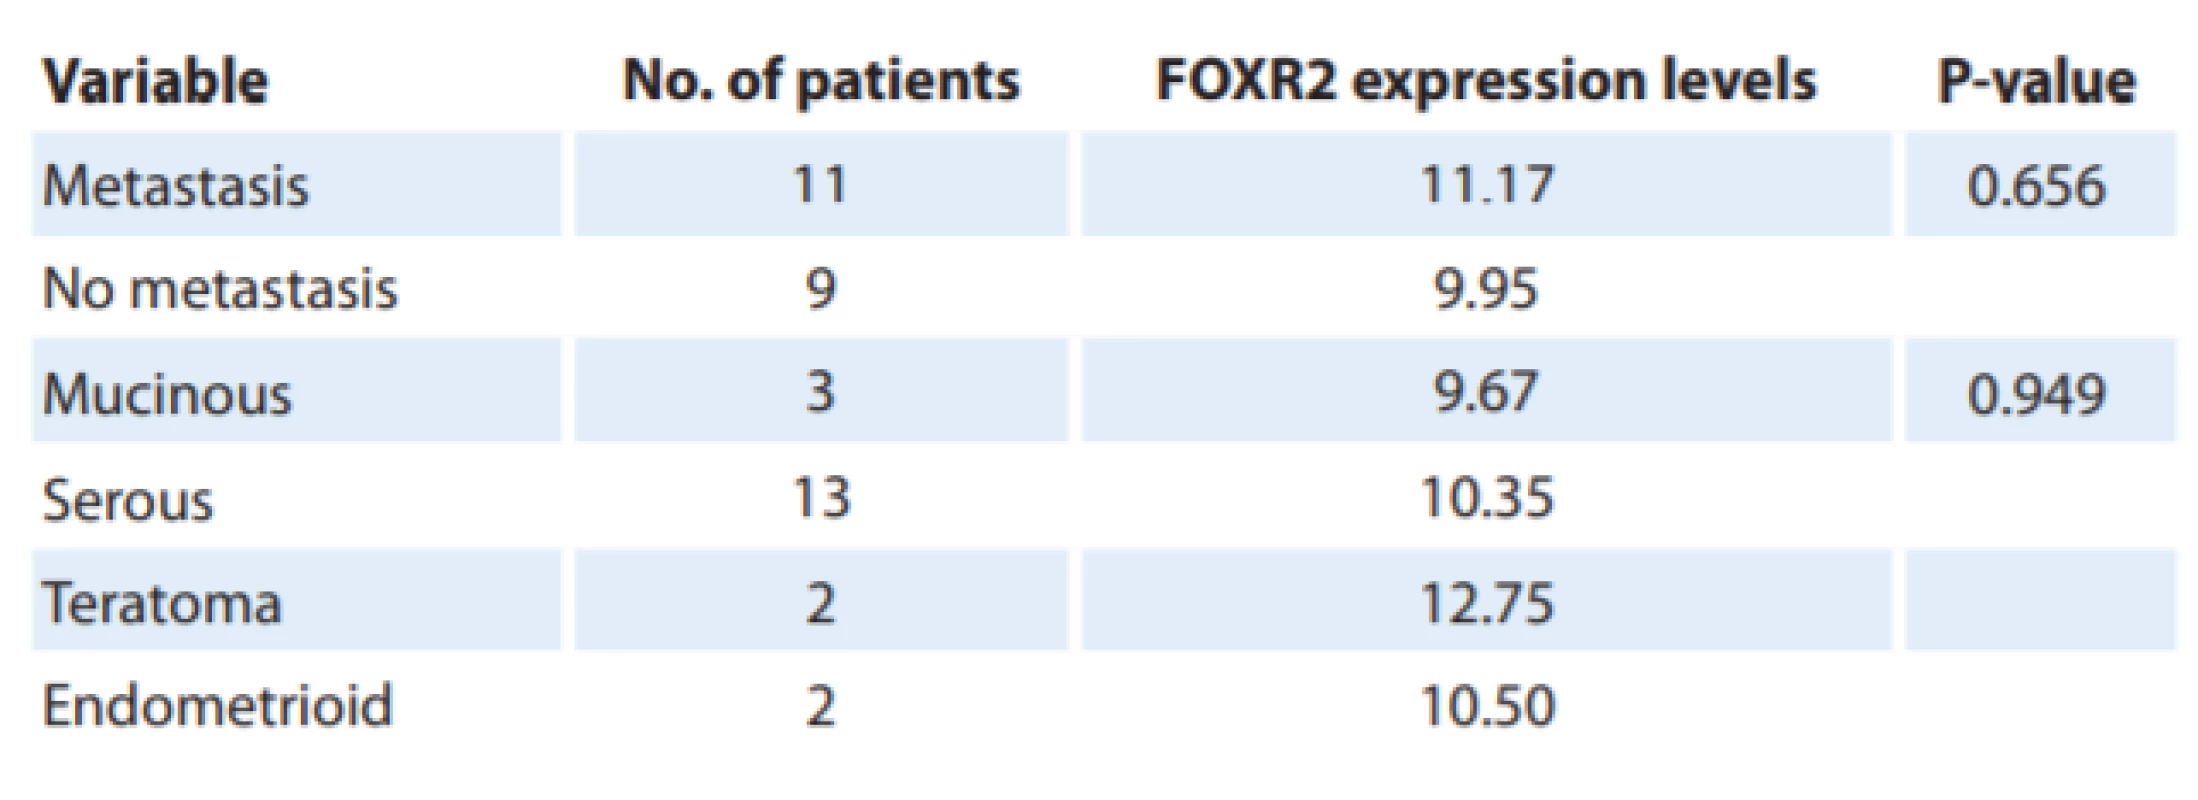 Correlations between FOXR2 expression levels and clinicopathological parameters of epithelial ovarian cancer.
